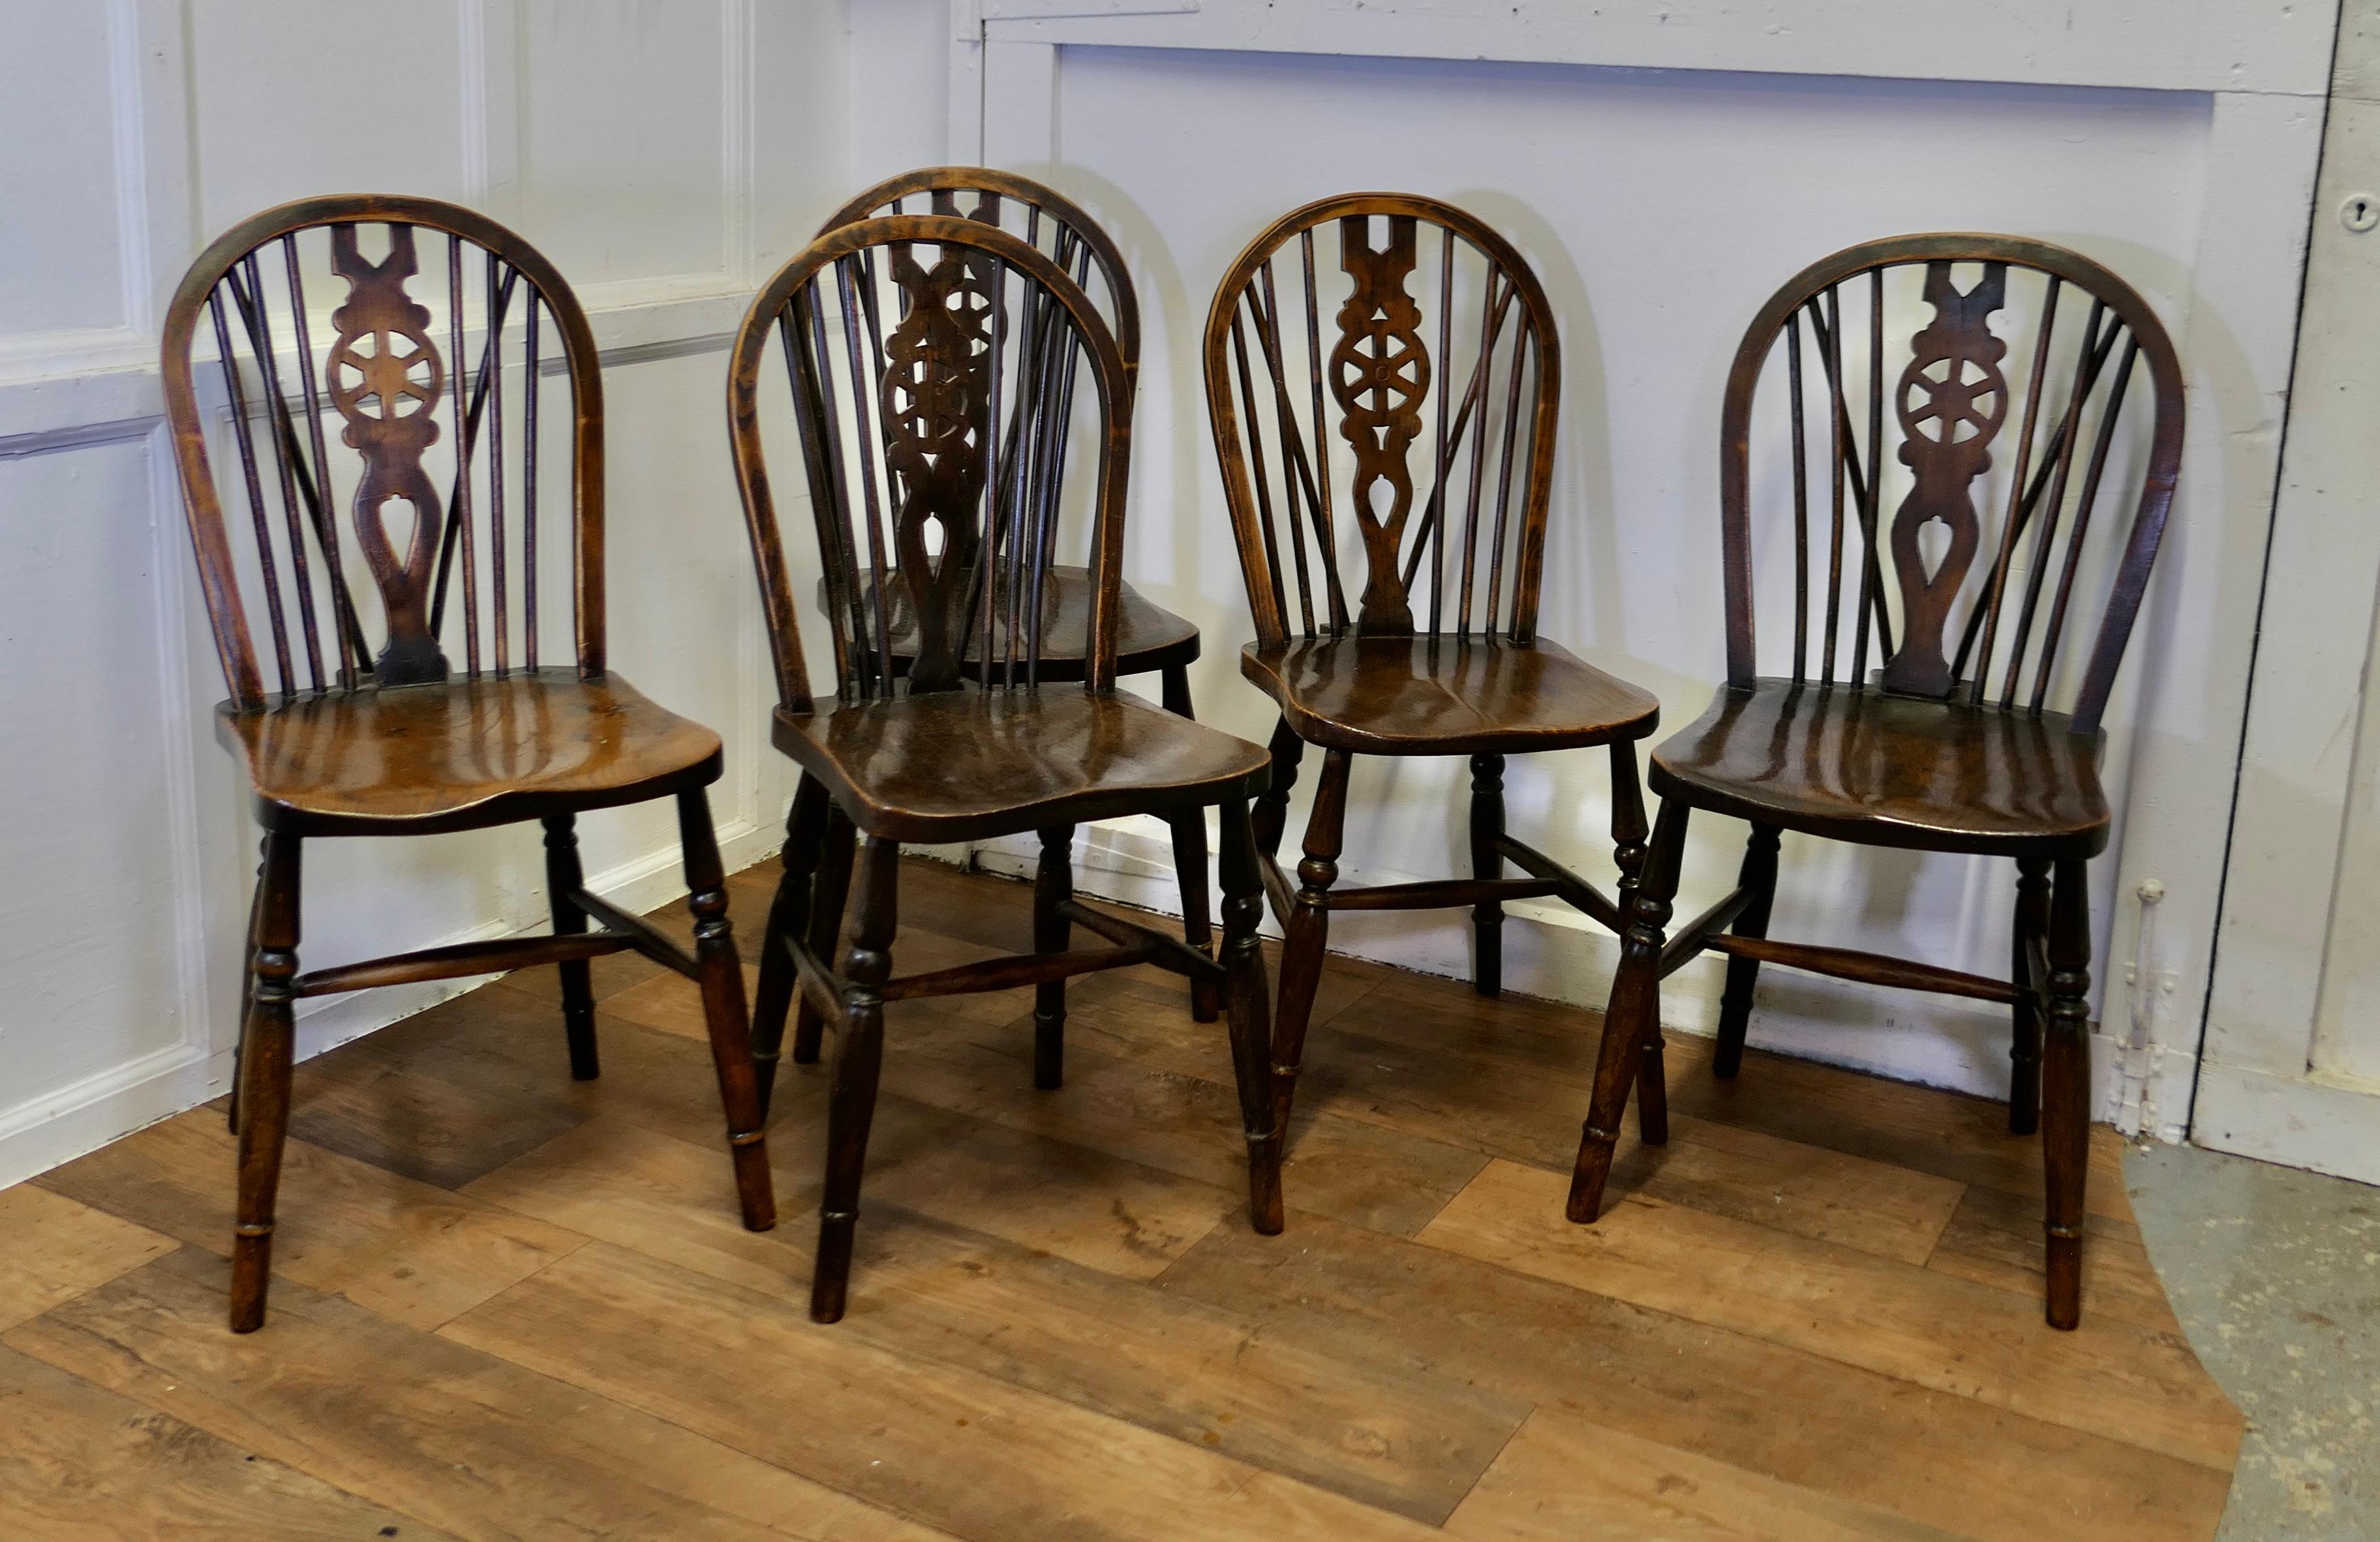 Set of 5 Victorian Beech & Elm Wheel Back Windsor Kitchen Dining Chairs

The chairs are a classic design and traditionally made from solid wood they have hooped backs with a wedge in the traditional Windsor style, the back centre splat in the shape